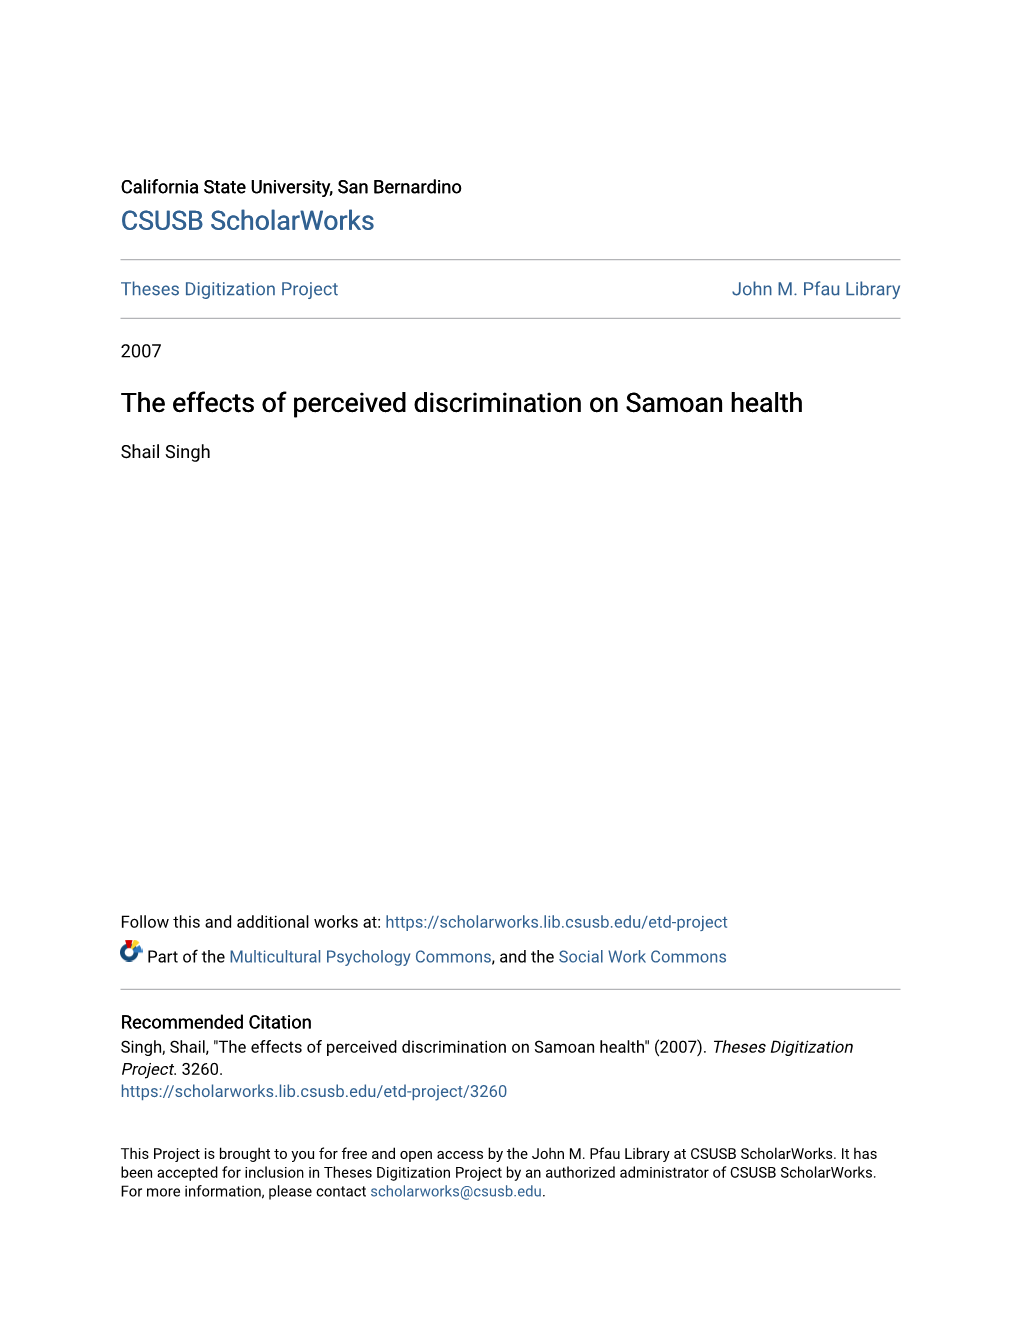 The Effects of Perceived Discrimination on Samoan Health